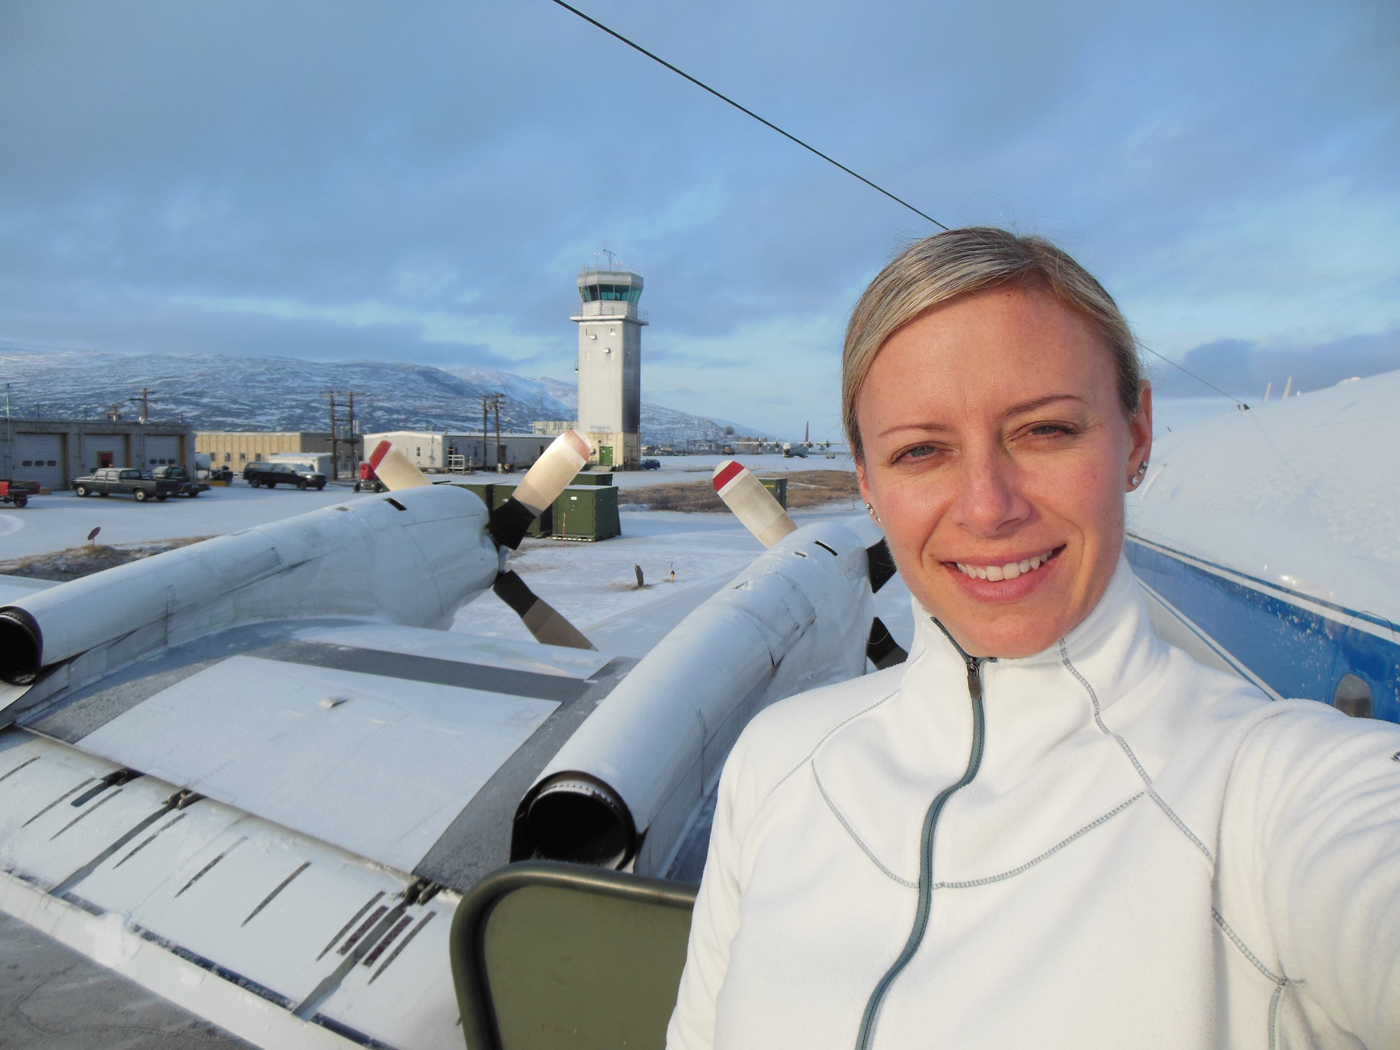 Christy Hansen in Kanger, Greenland, after one of Operation IceBridge’s science flights. Behind her is the air traffic control tower, as well as the P-3B propellers.